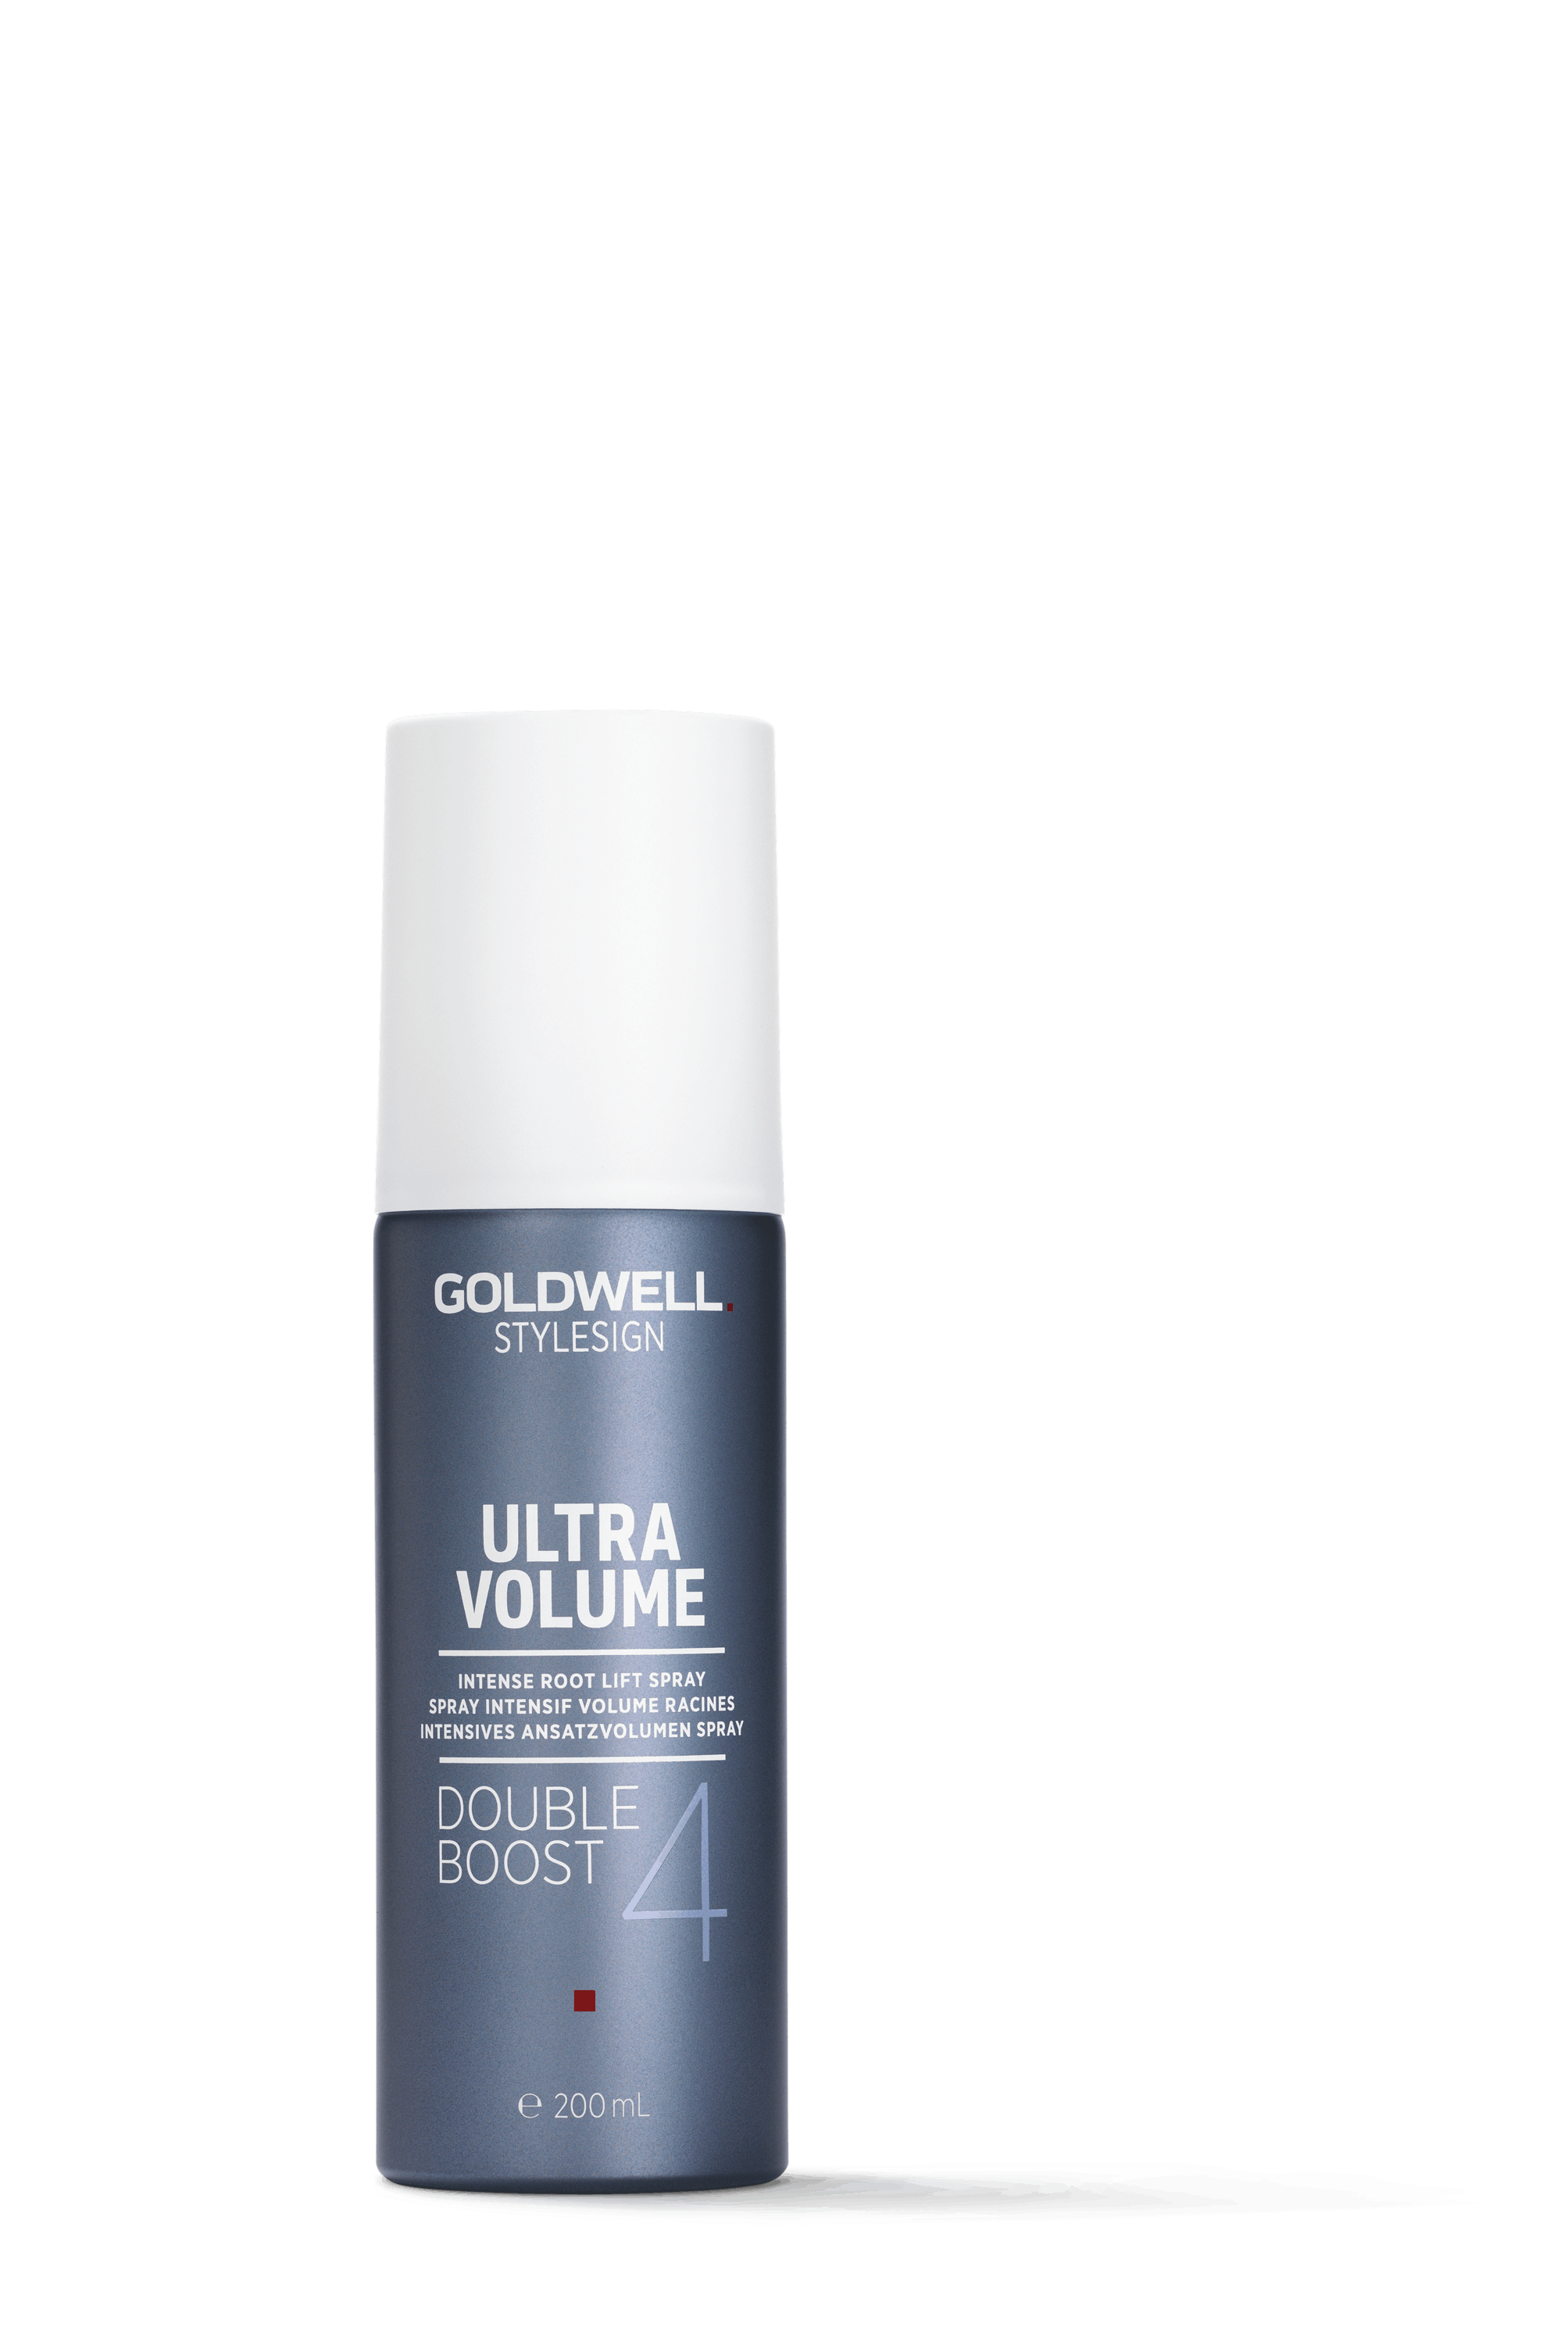 Goldwell Double Boost